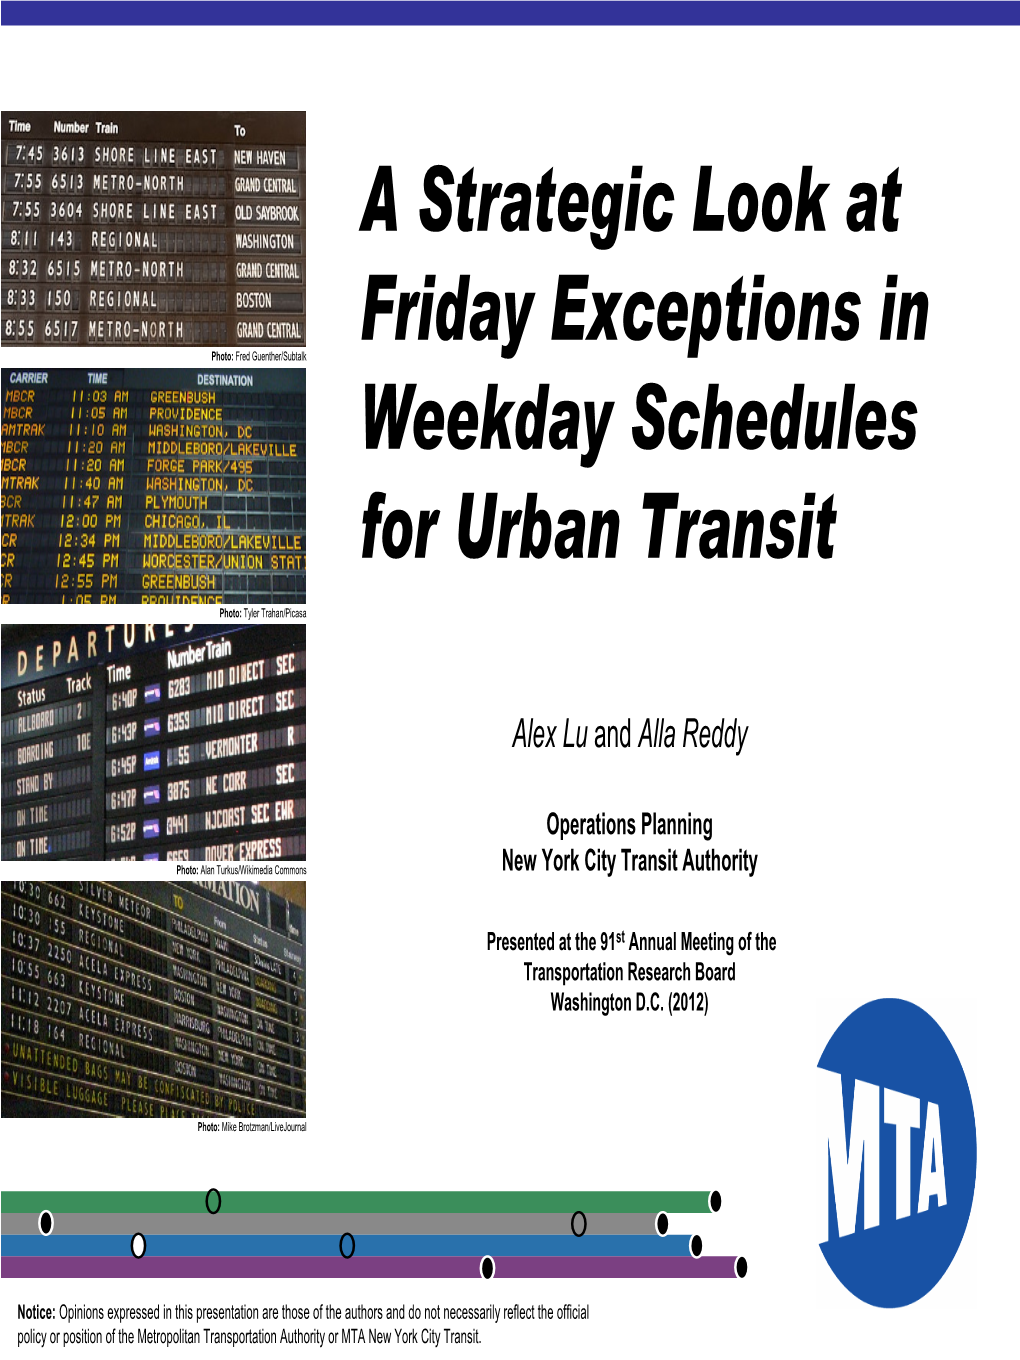 A Strategic Look at Friday Exceptions in Weekday Schedules for Urban Transit